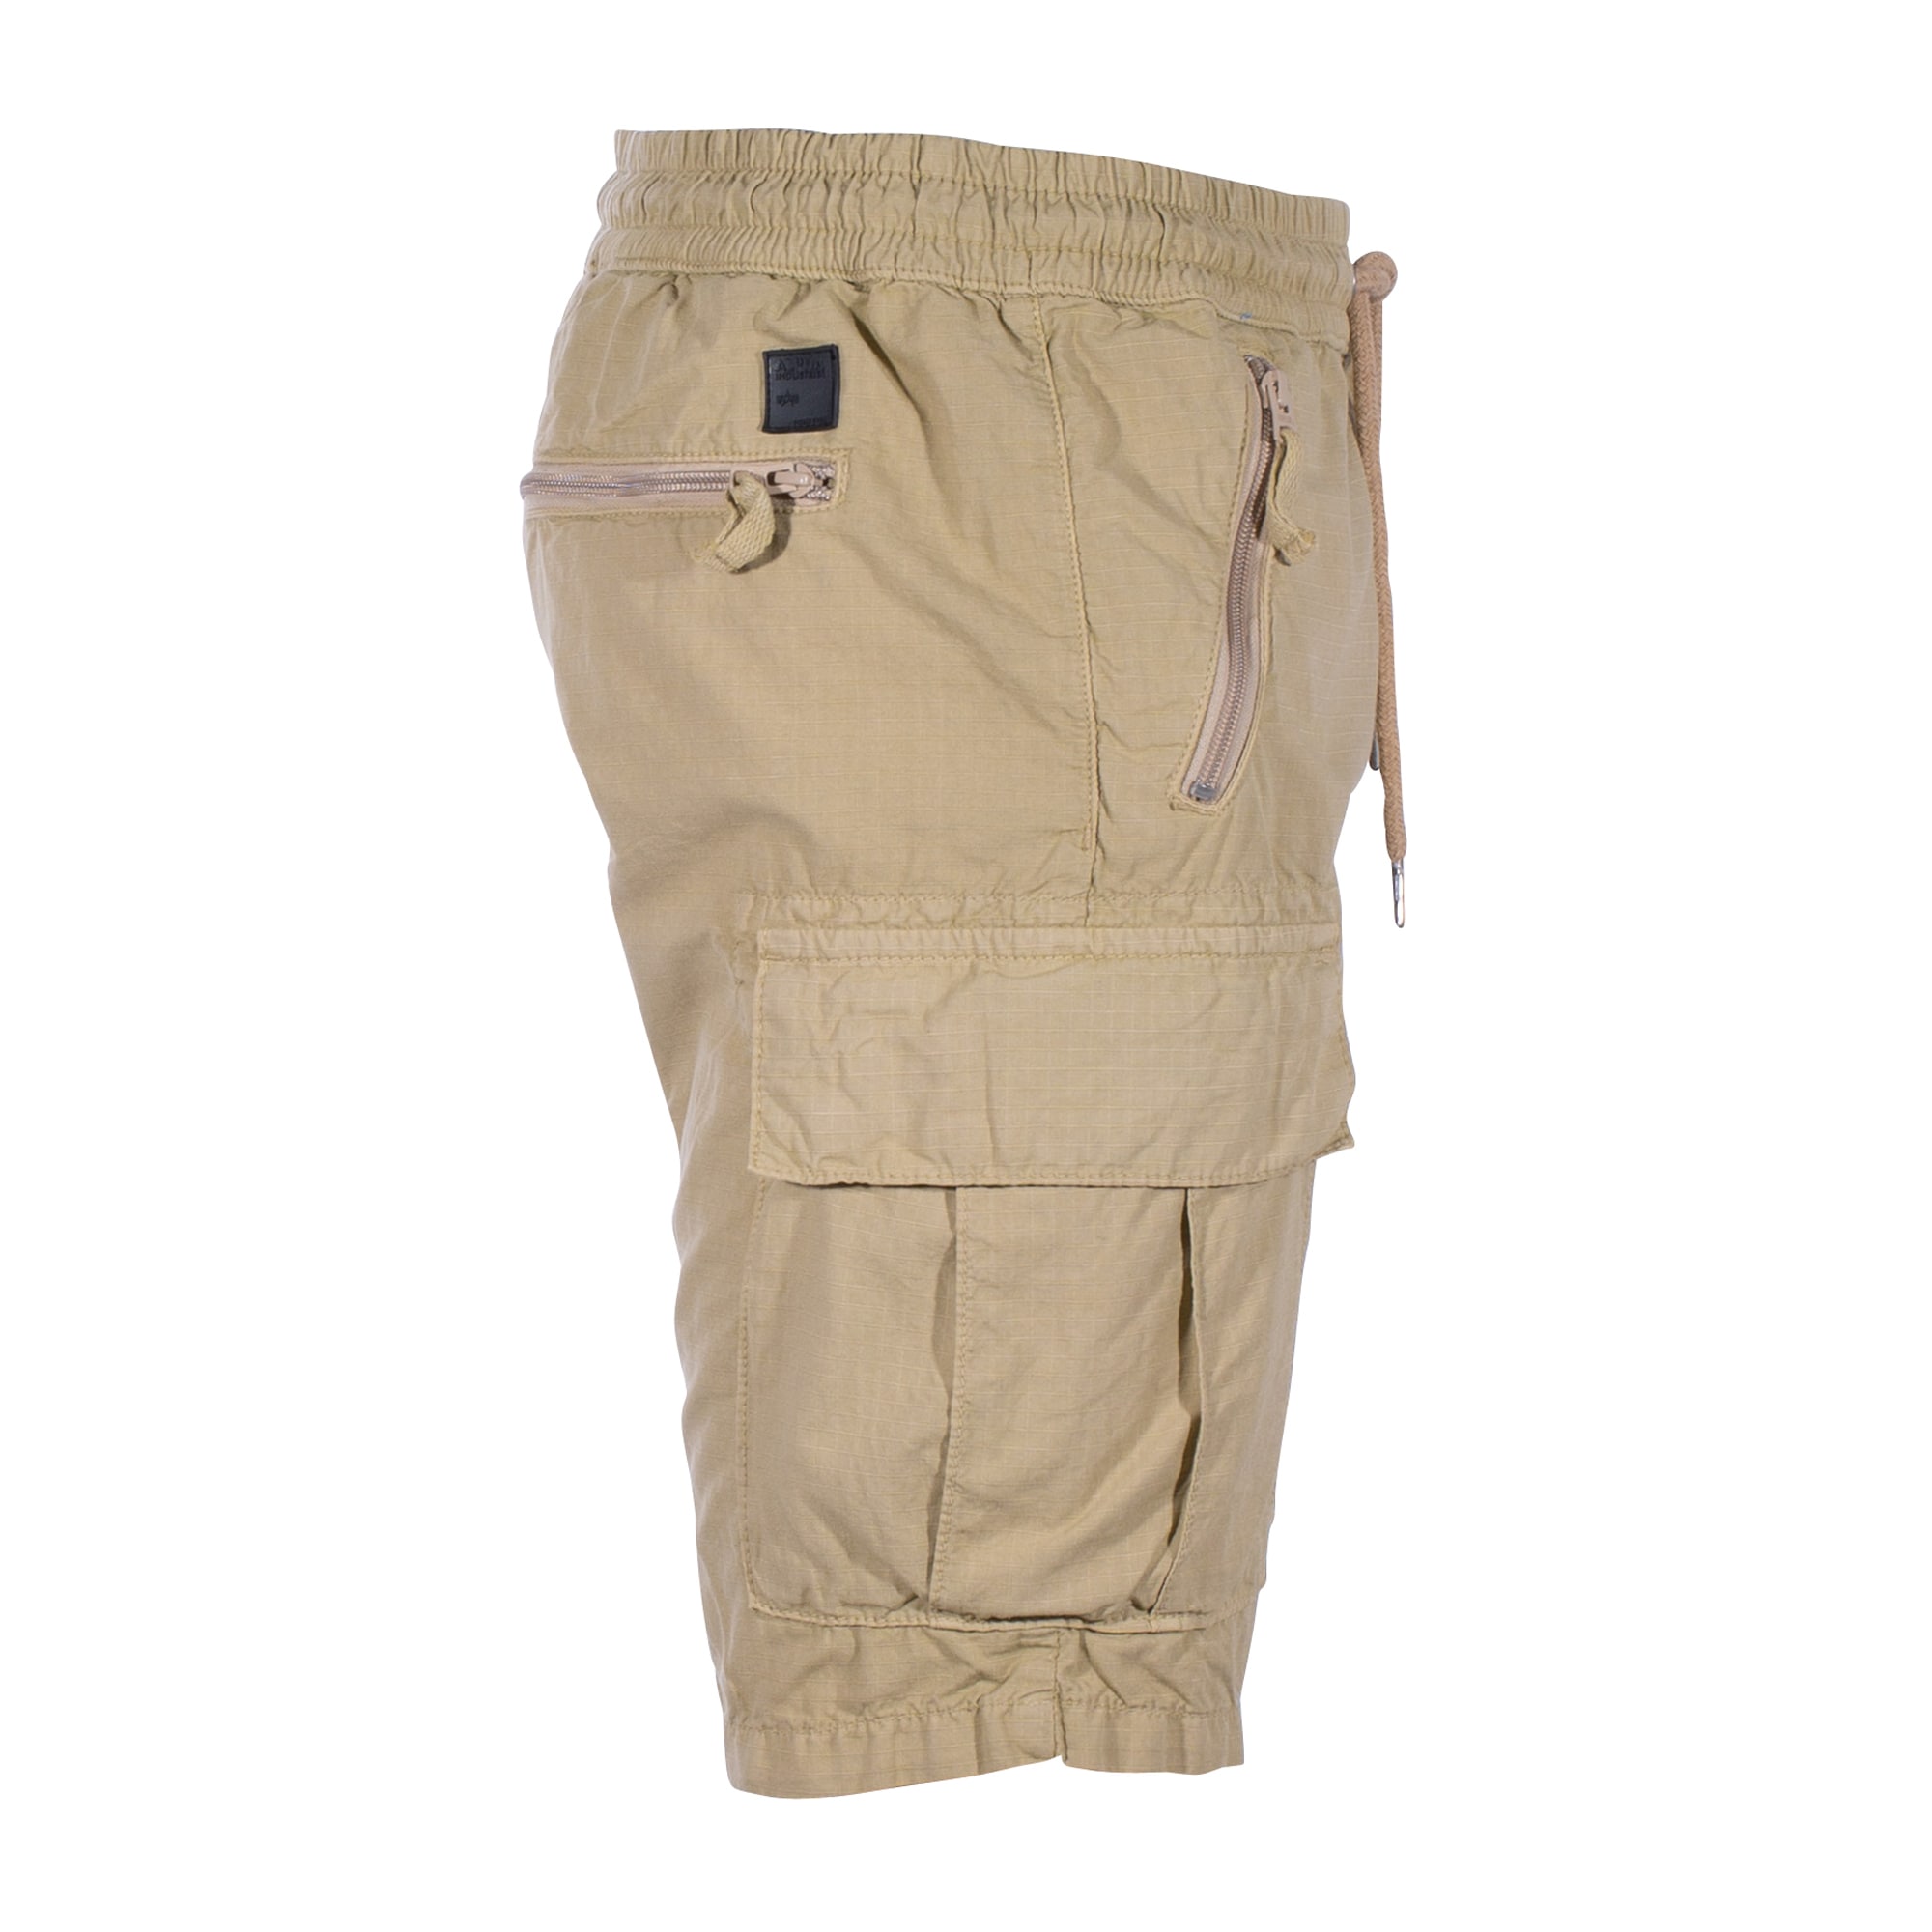 Purchase the Alpha Industries by Short ASMC Jogger Ripstop sand